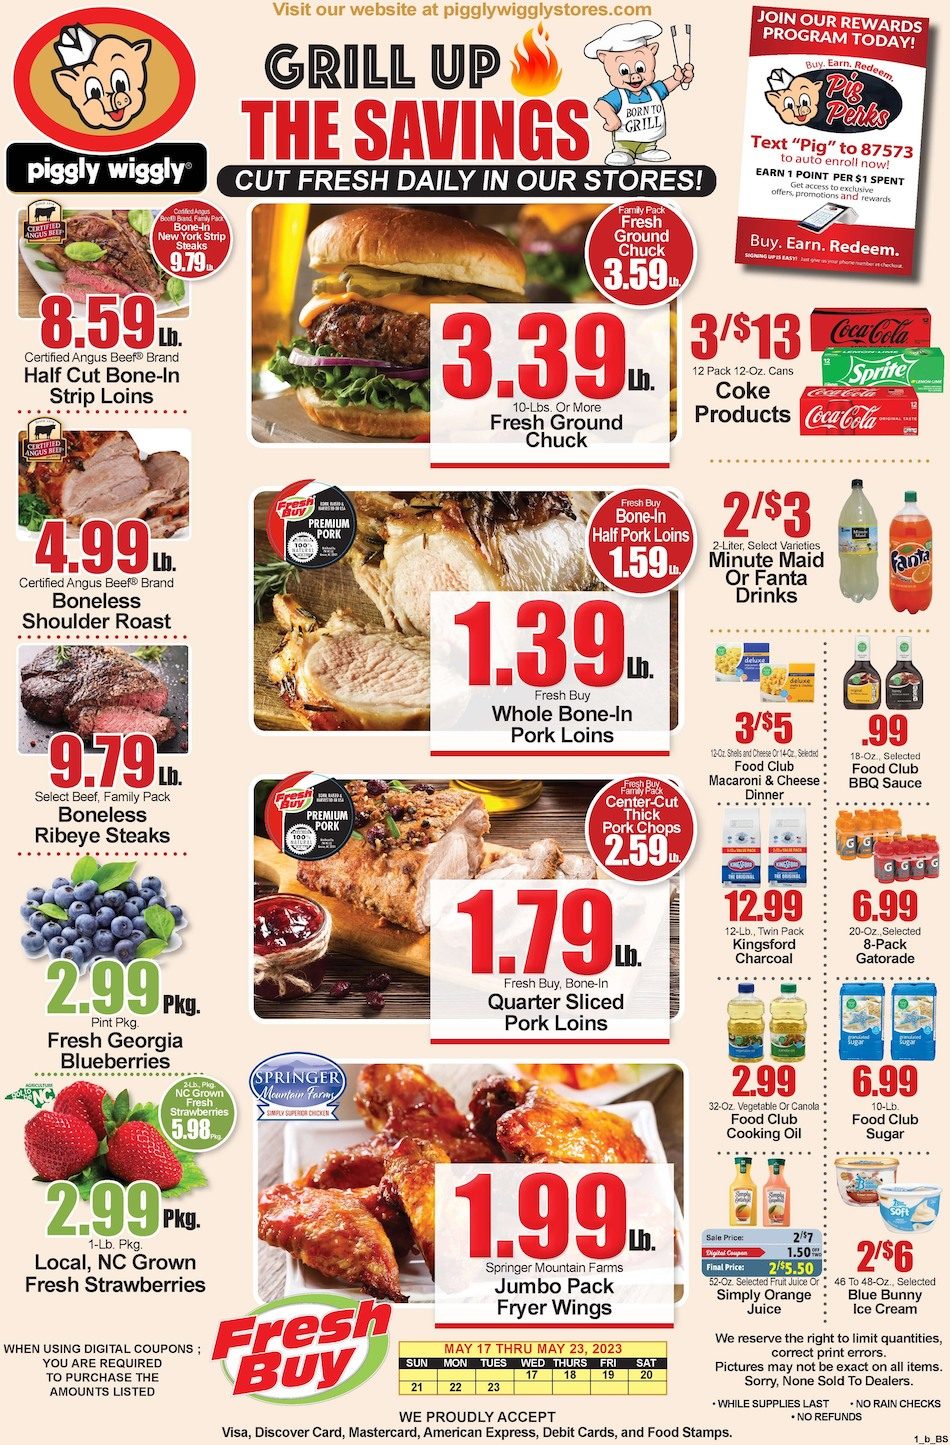 piggly wiggly tallahassee weekly ad